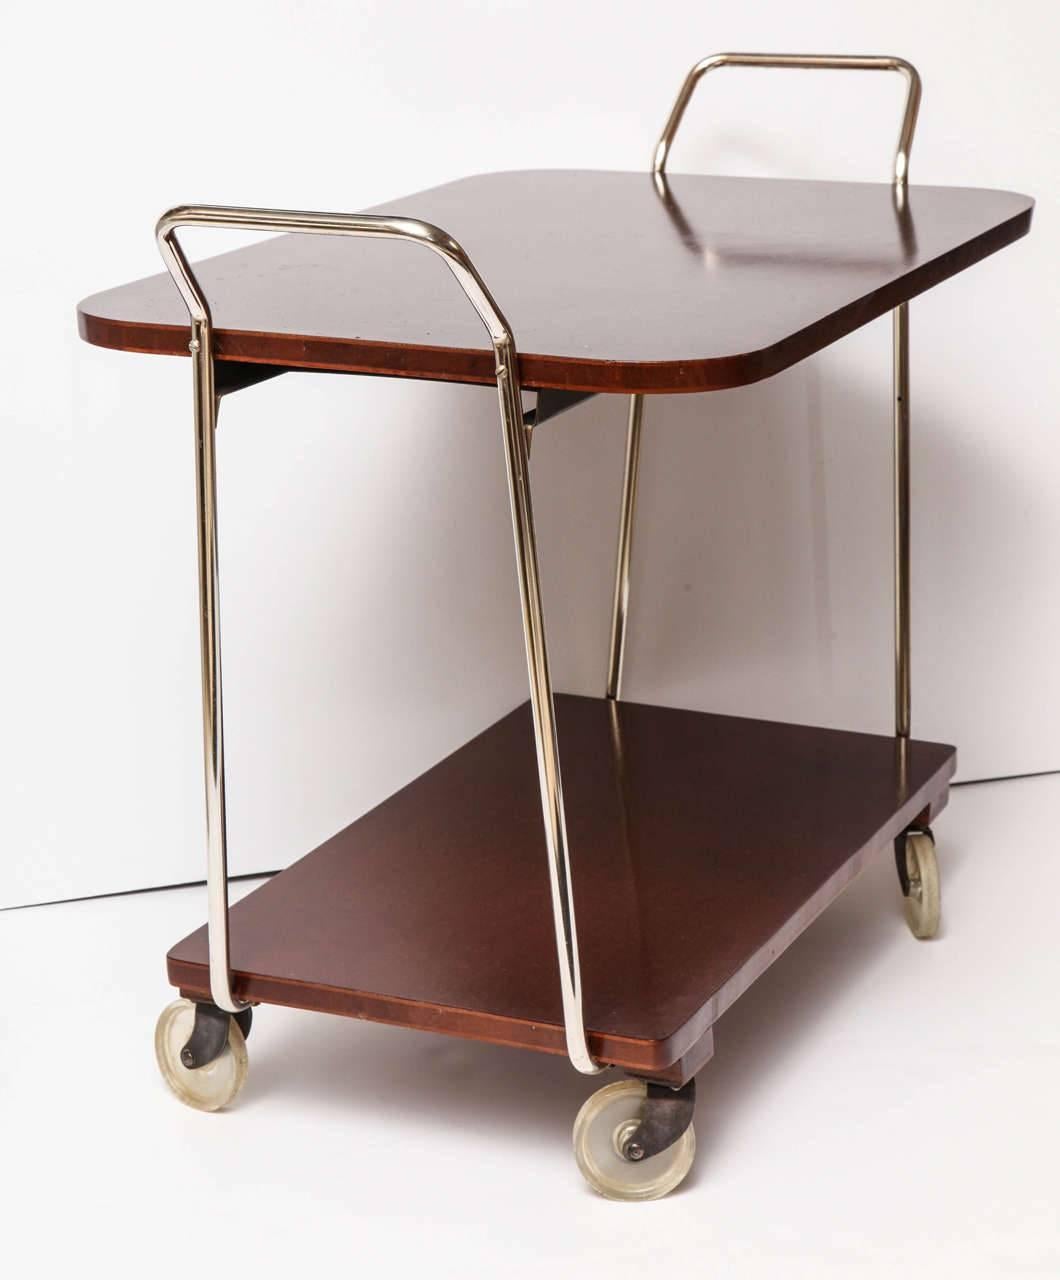 Stained Wood Bar Cart with Chrome Details, circa 1950